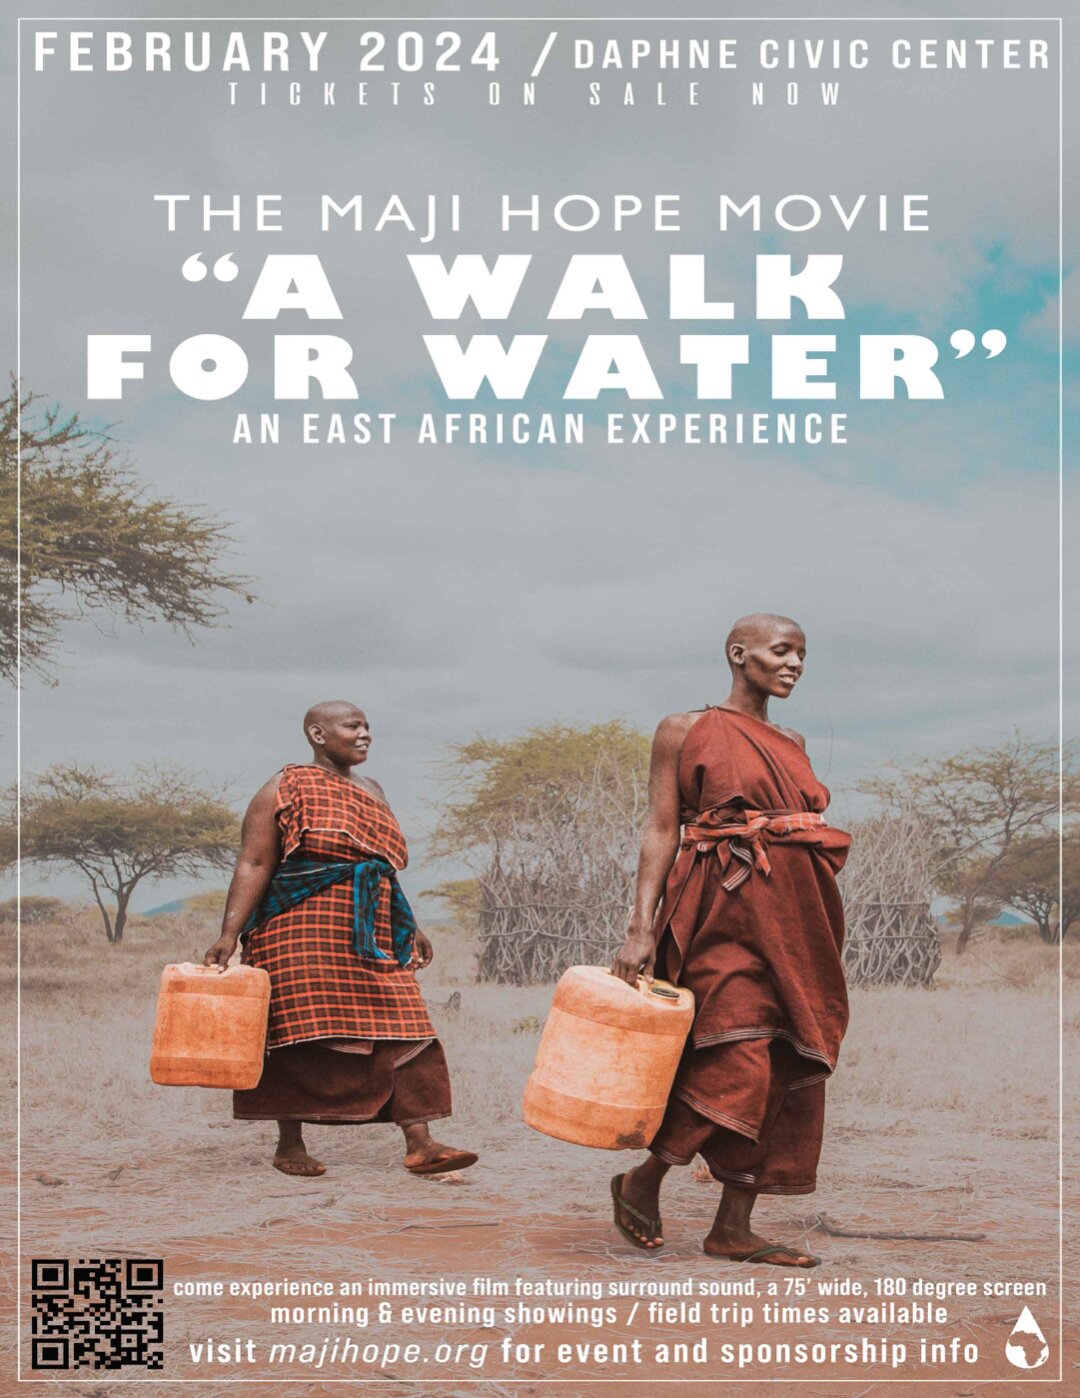 The "A Walk For Water" movie will be shown at various times beginning Tuesday, Feb. 20 through Friday, Feb. 23, and again Monday, Feb 26, through Wednesday, Feb. 28. Daytime tickets are $10 and evening shows are $15.